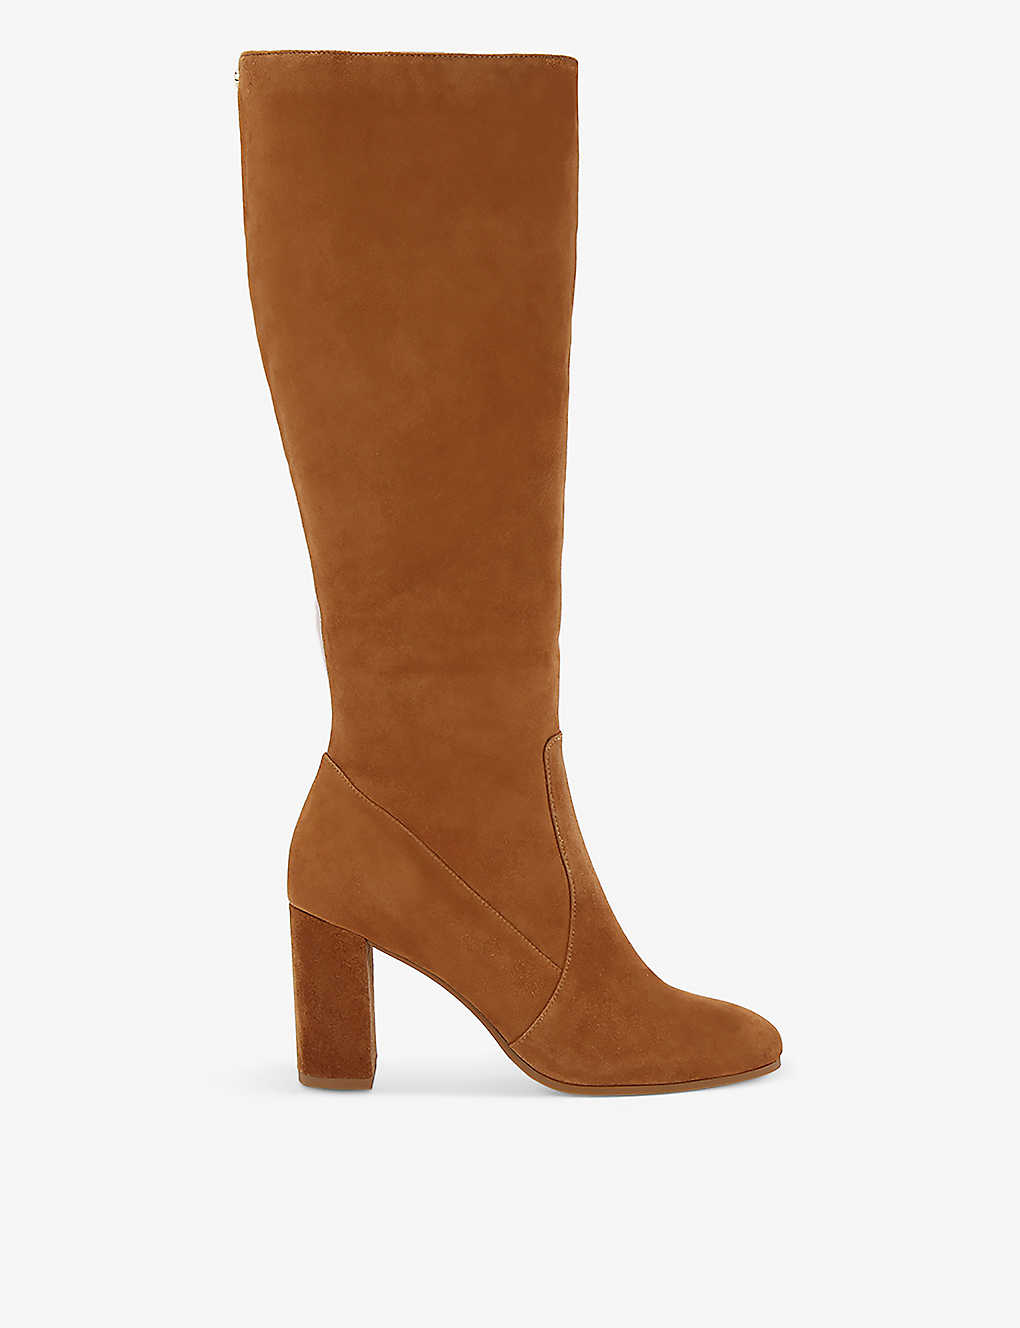 Carvela Womens Tan Pose Leather Knee-high Boots